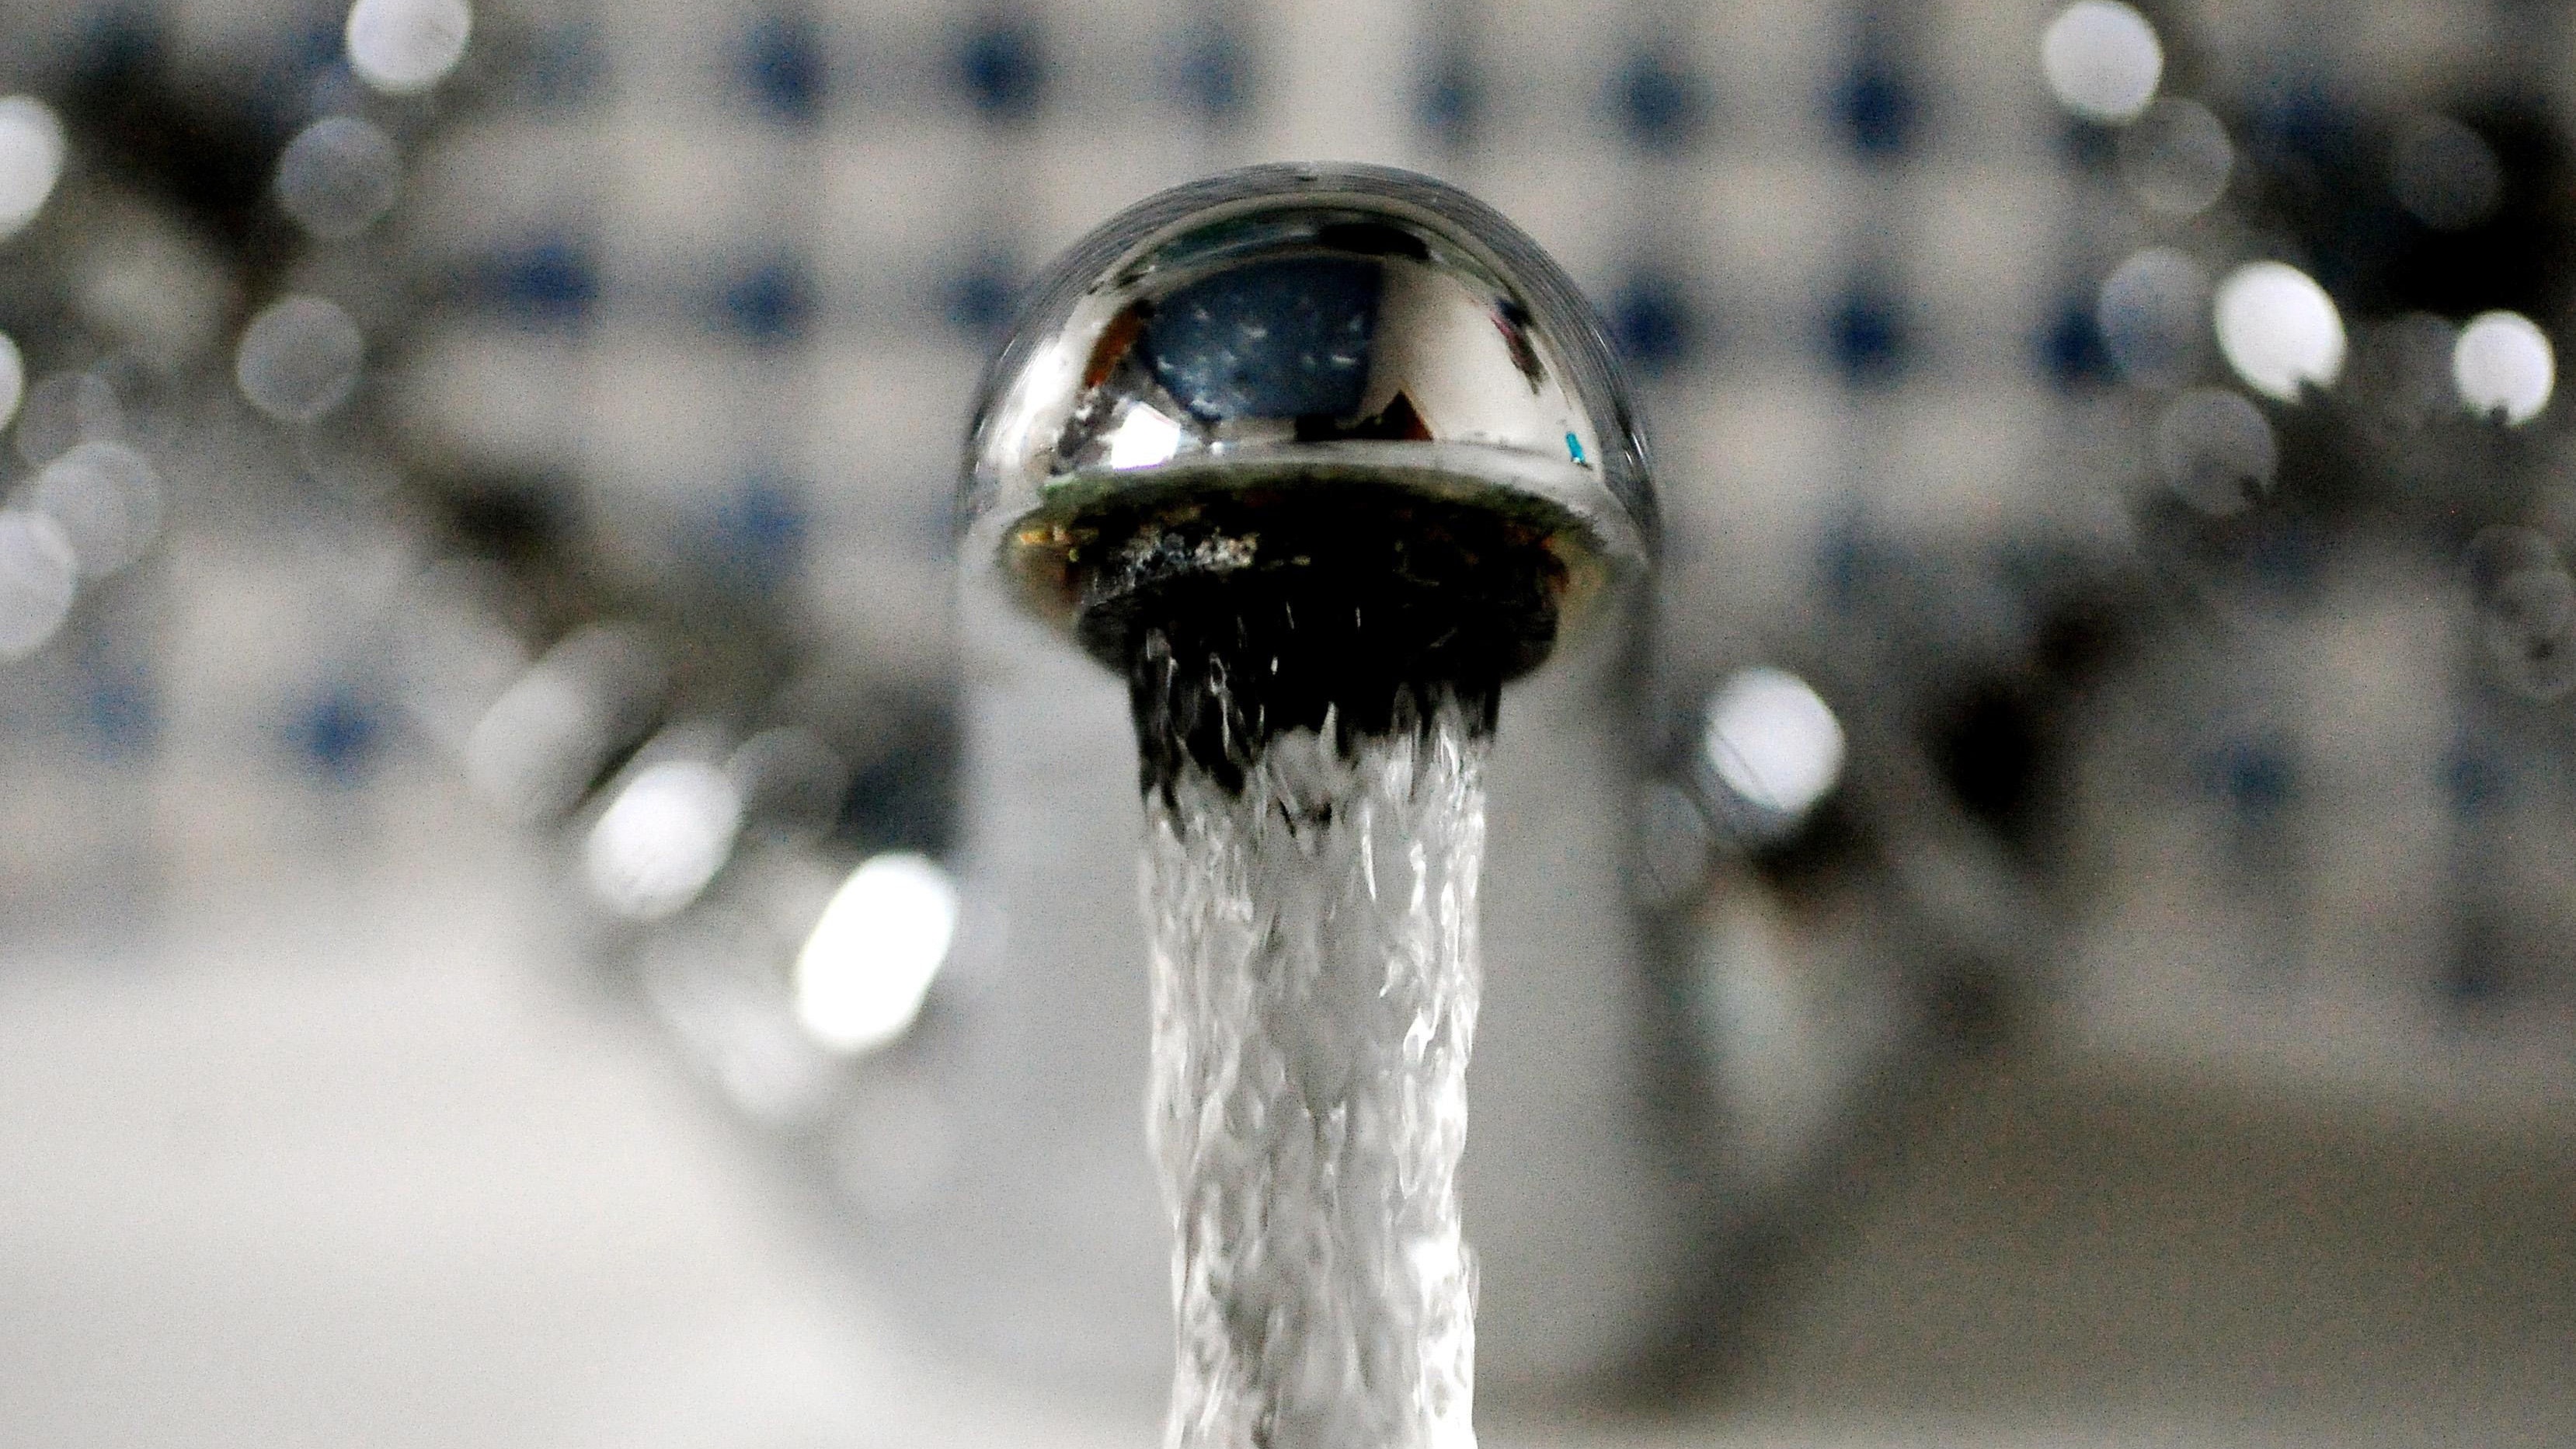 Regulator outlines review scope after thousands left without water | BT